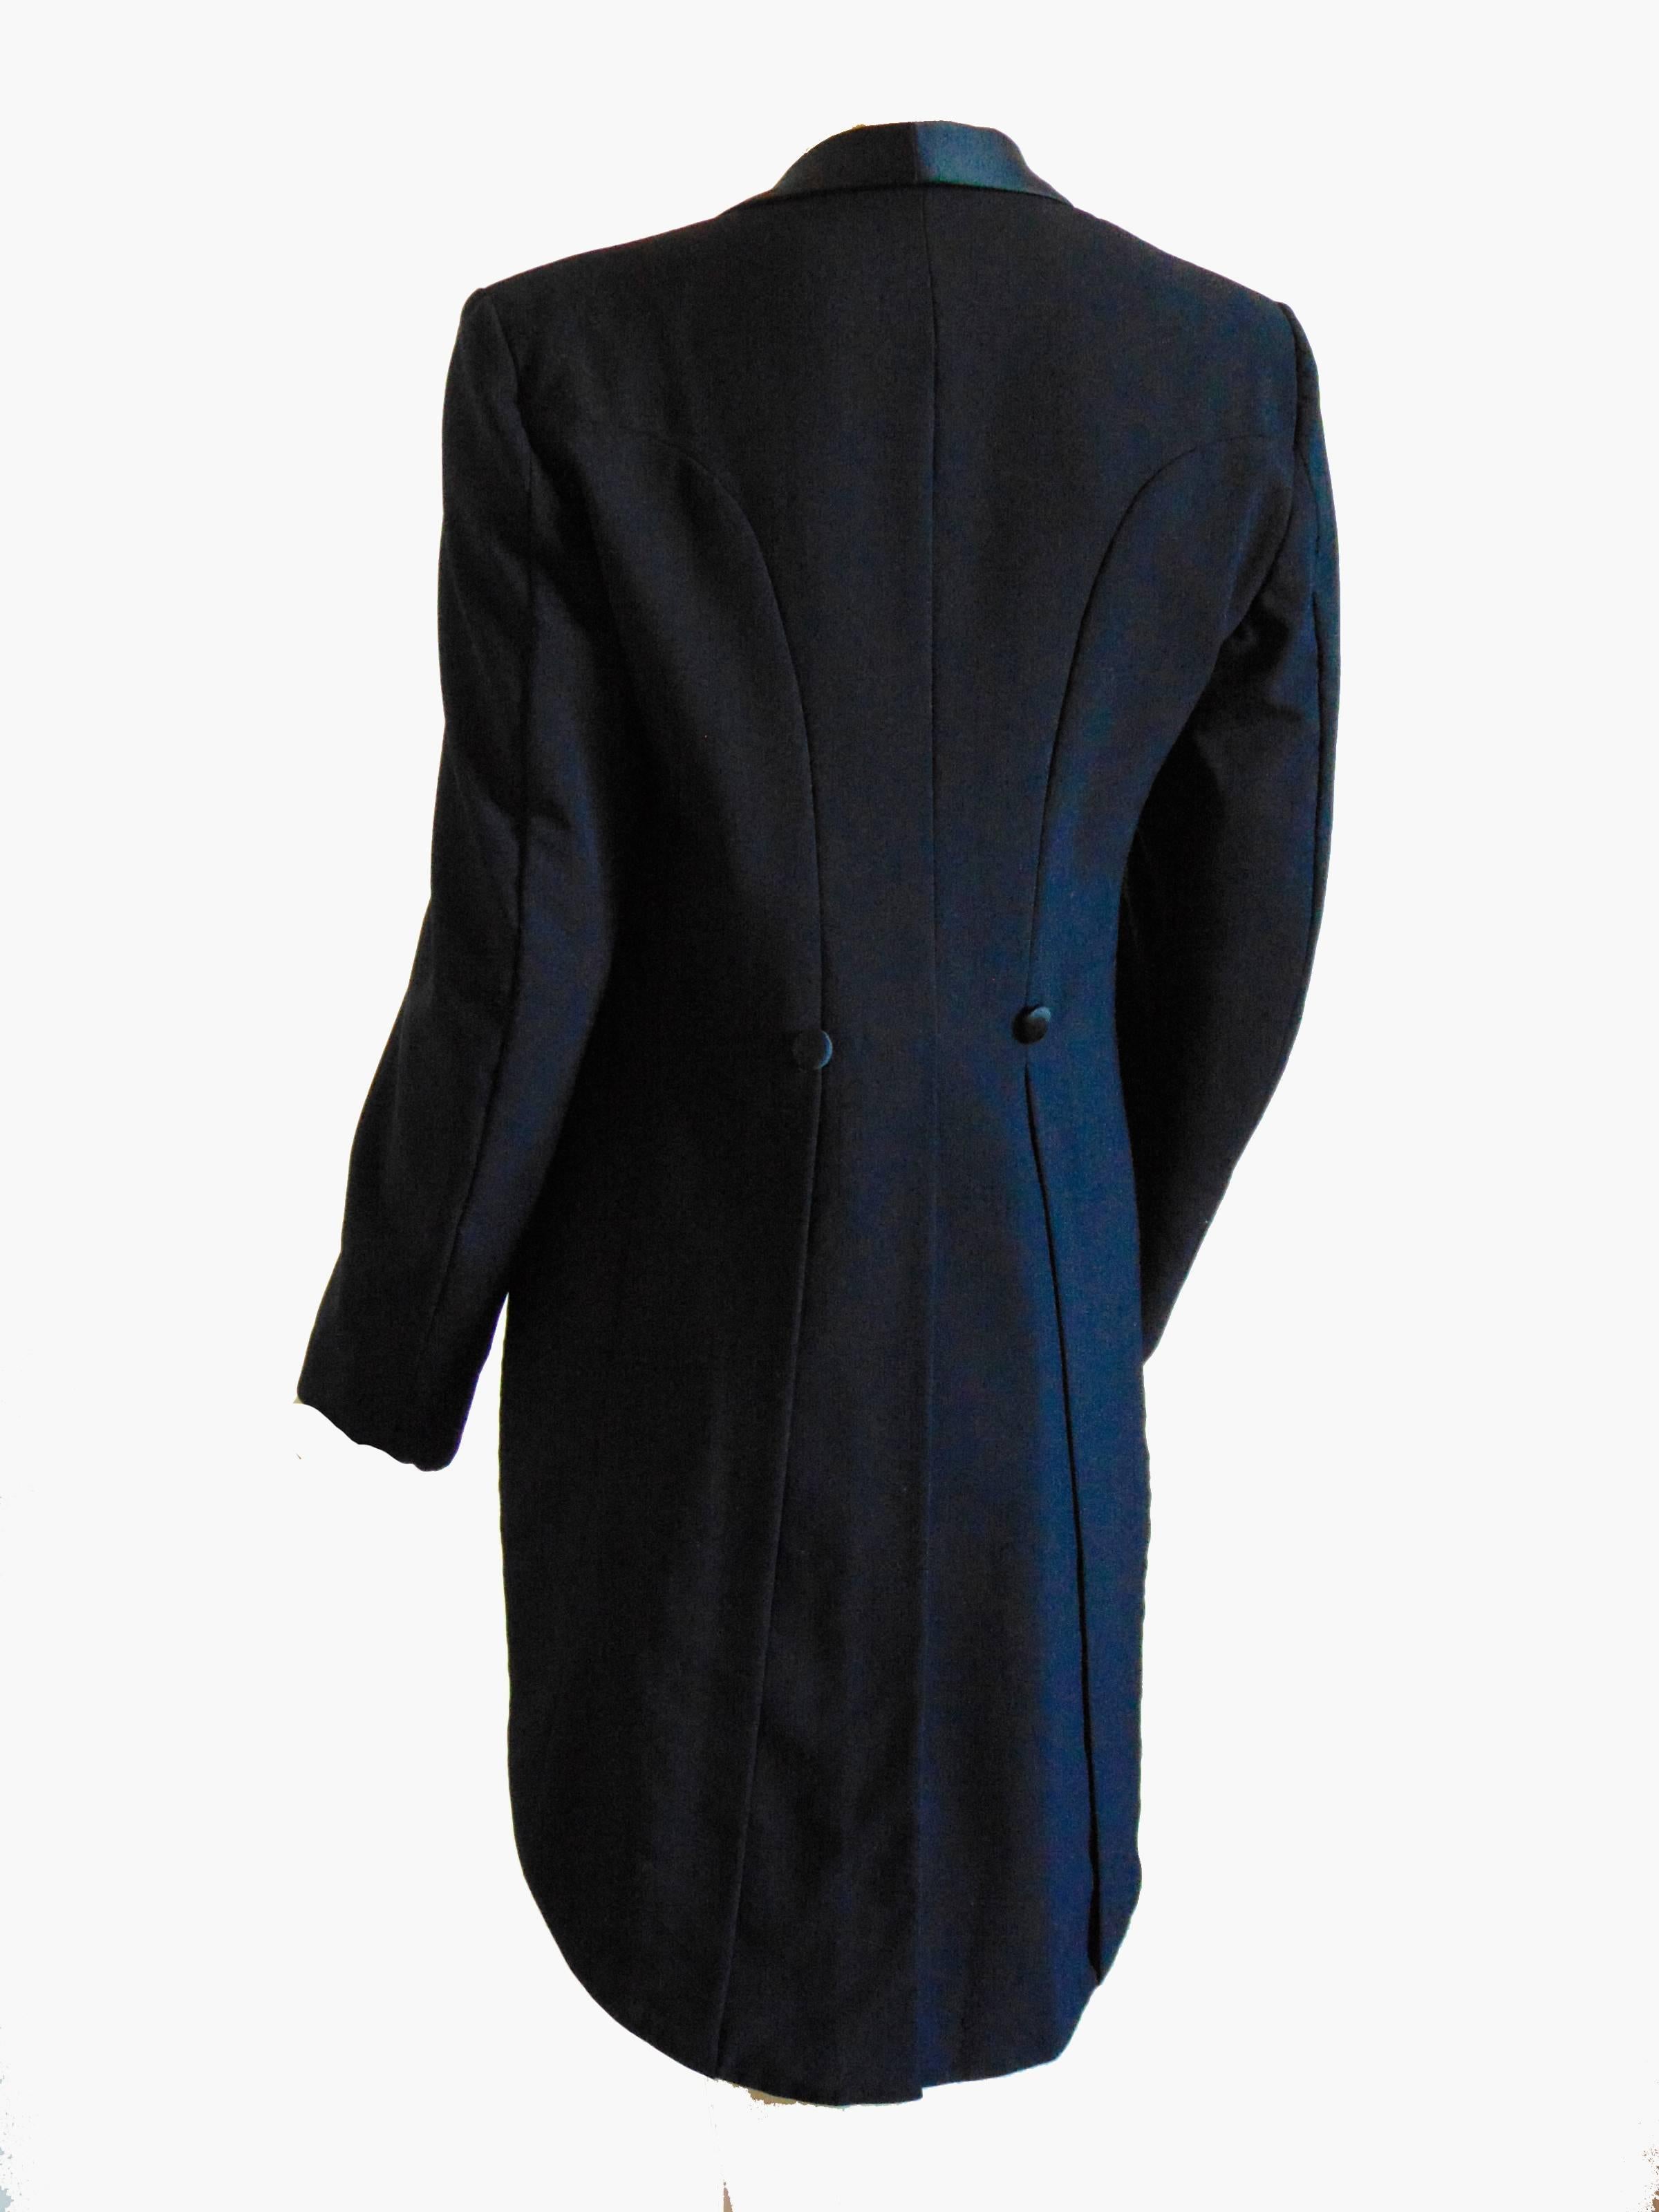 Here's a cool black tuxedo jacket from Christian Dior for their Jeune Homme collection for young men.  Made from black wool with black silk satin trim, it's fully lined and doesn't fasten.  No size tag, but we're estimating this as a modern size